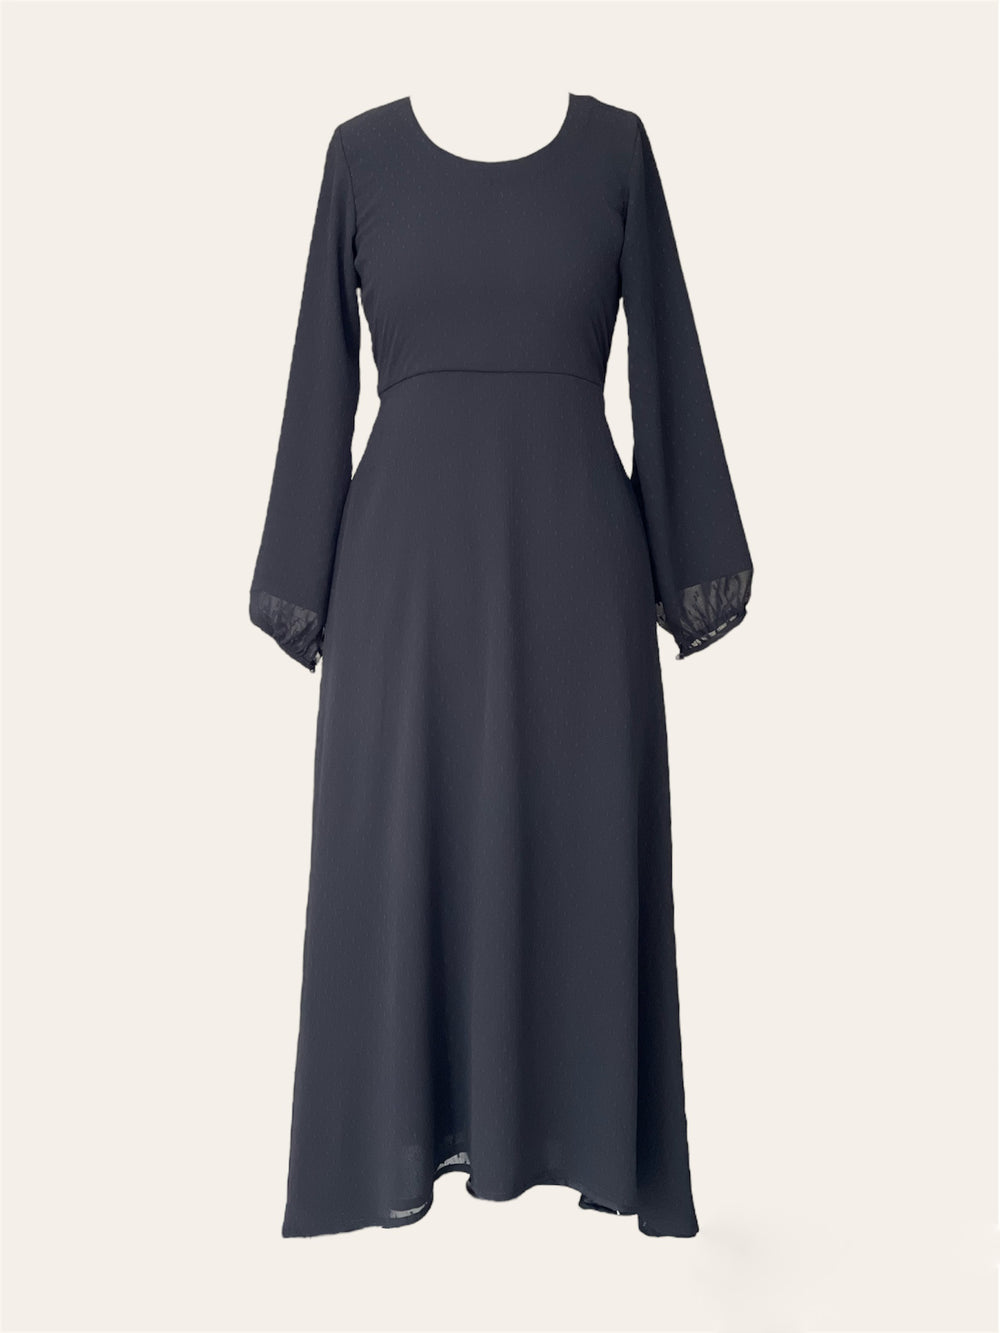 A long black dress with a scoop neckline and long, slightly puffed sleeves. The dress features a fitted bodice that transitions into a flowing skirt, with subtle texture detailing on the fabric. The sleeves end in a gentle, elasticized gather.